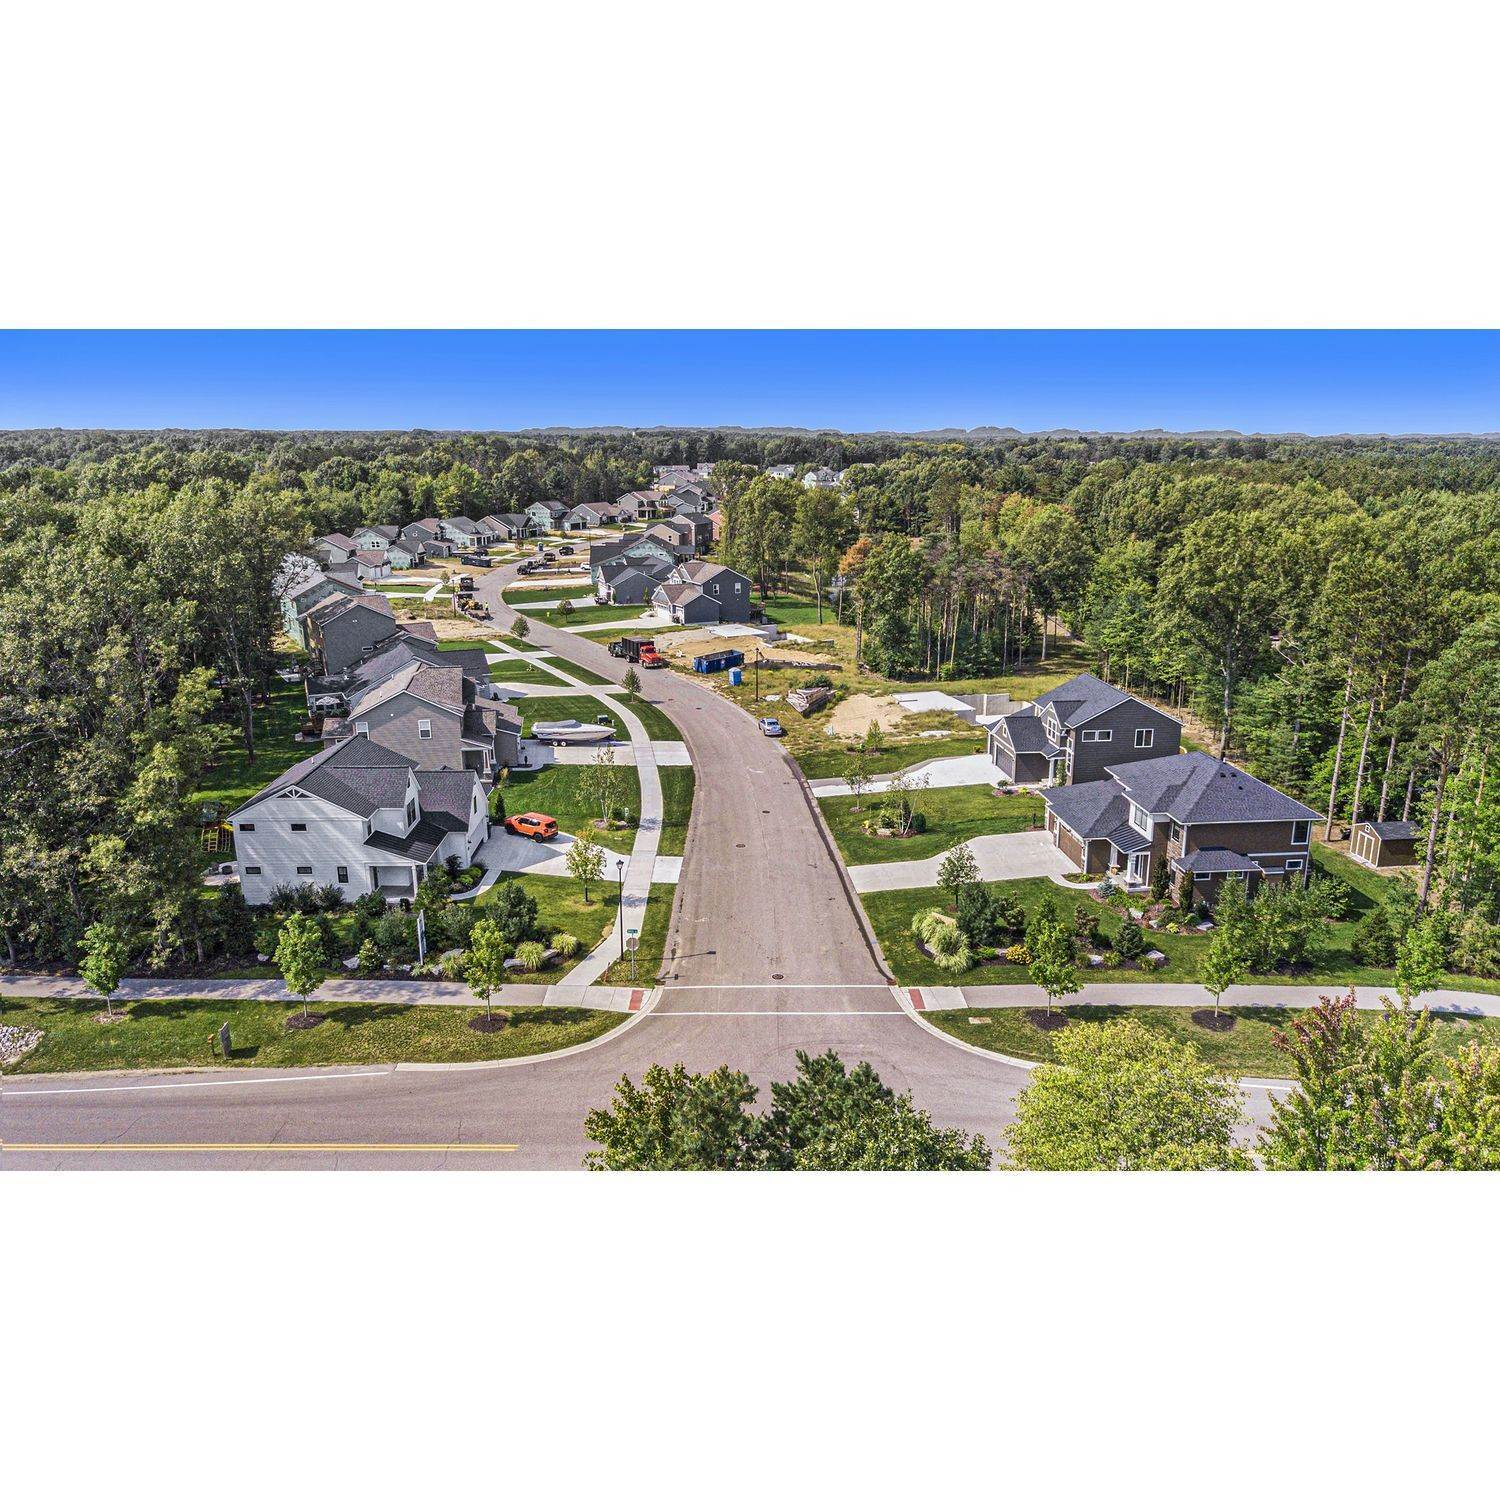 10. Lincoln Pines建於 14449 Windway Drive, Grand Haven, MI 49417